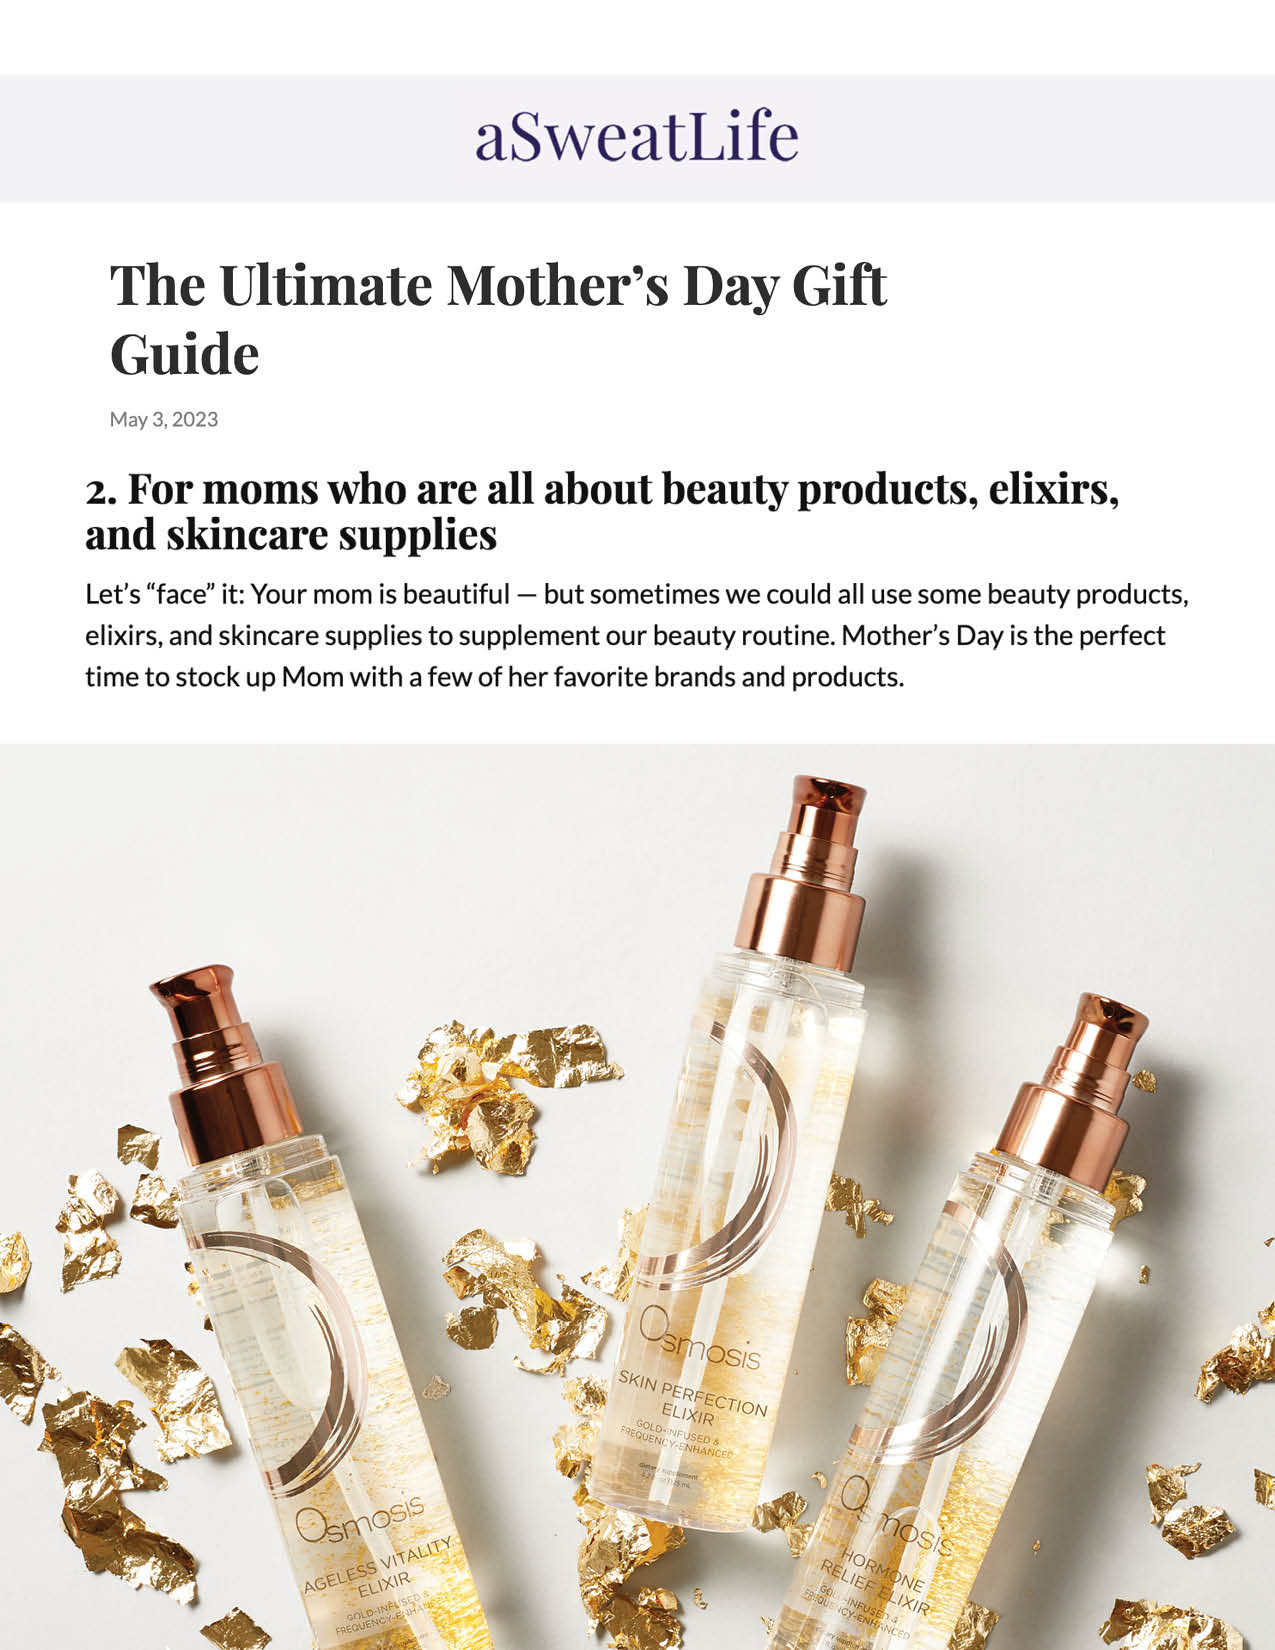 aSweatLife mentioned Osmosis Beauty (Specifically mentioning as an additional brand of elixirs to check out on #2) in their gift guide titled The Ultimate Mothers Day Gift Guide